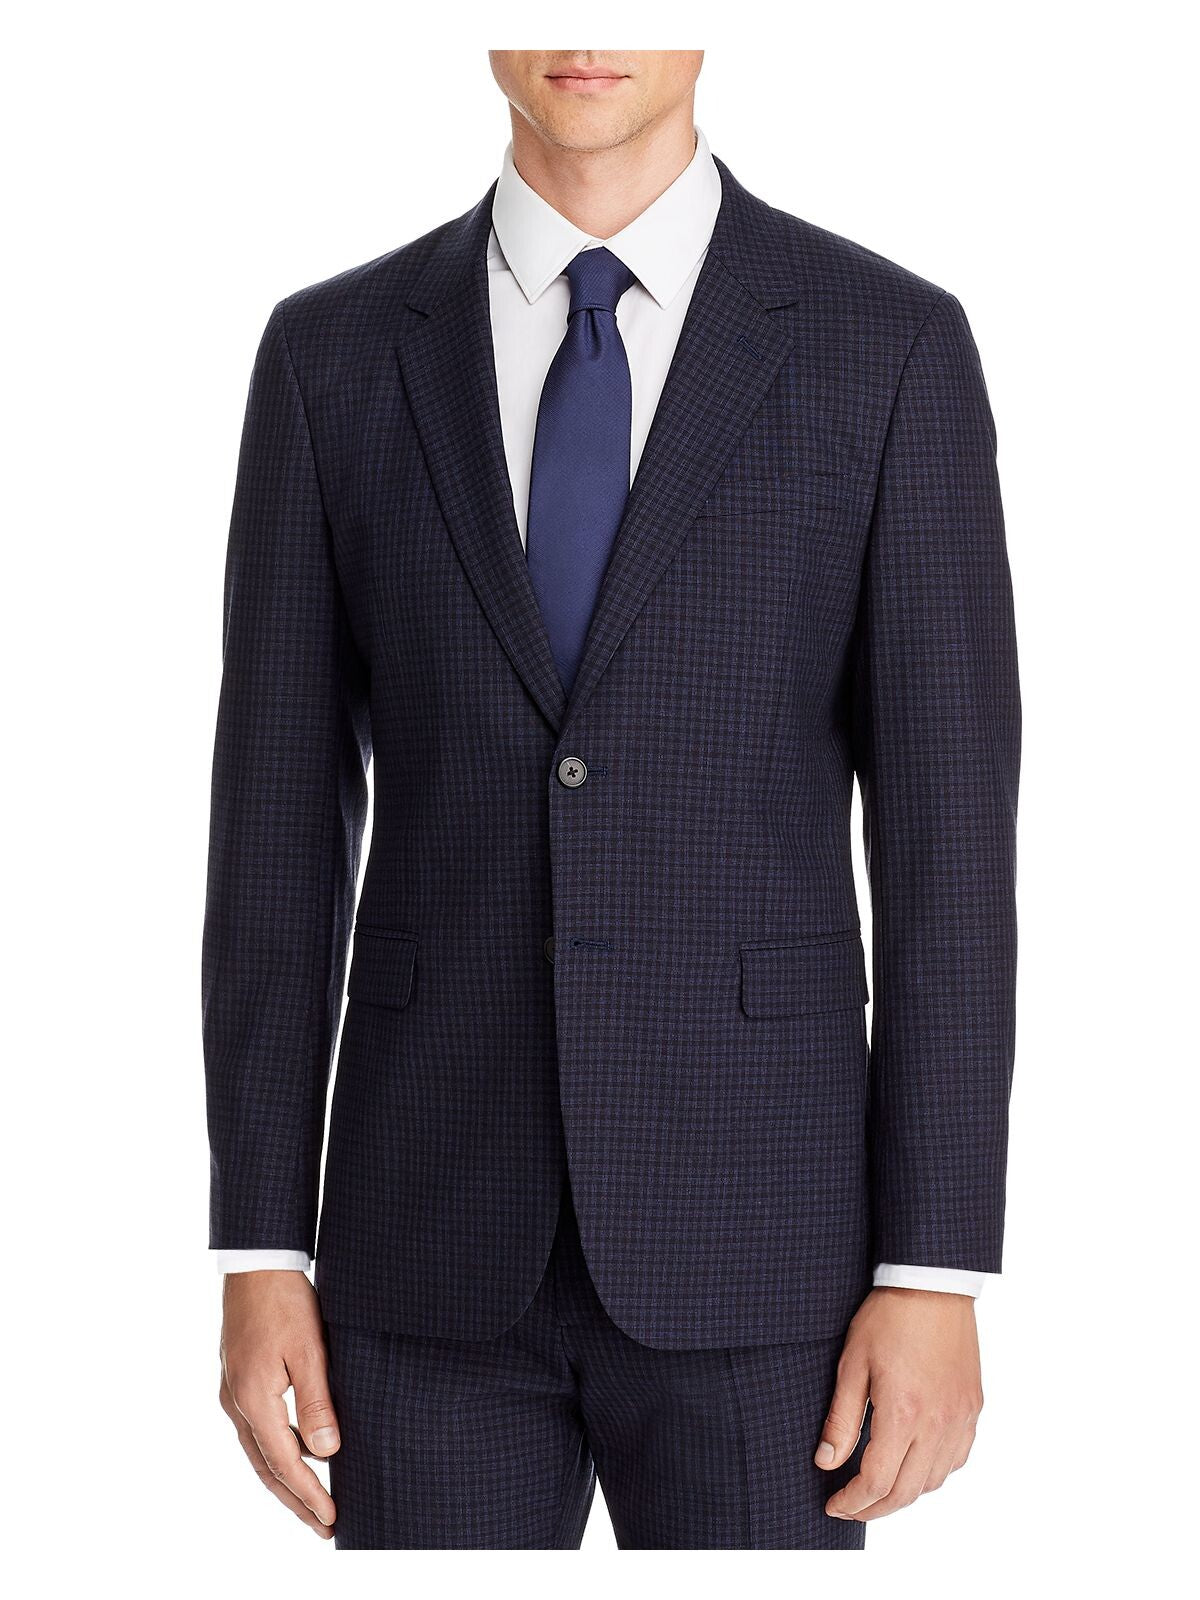 THEORY Mens Chambers Navy Single Breasted, Extra Slim Fit Suit Separate Blazer Jacket 38 SHORT